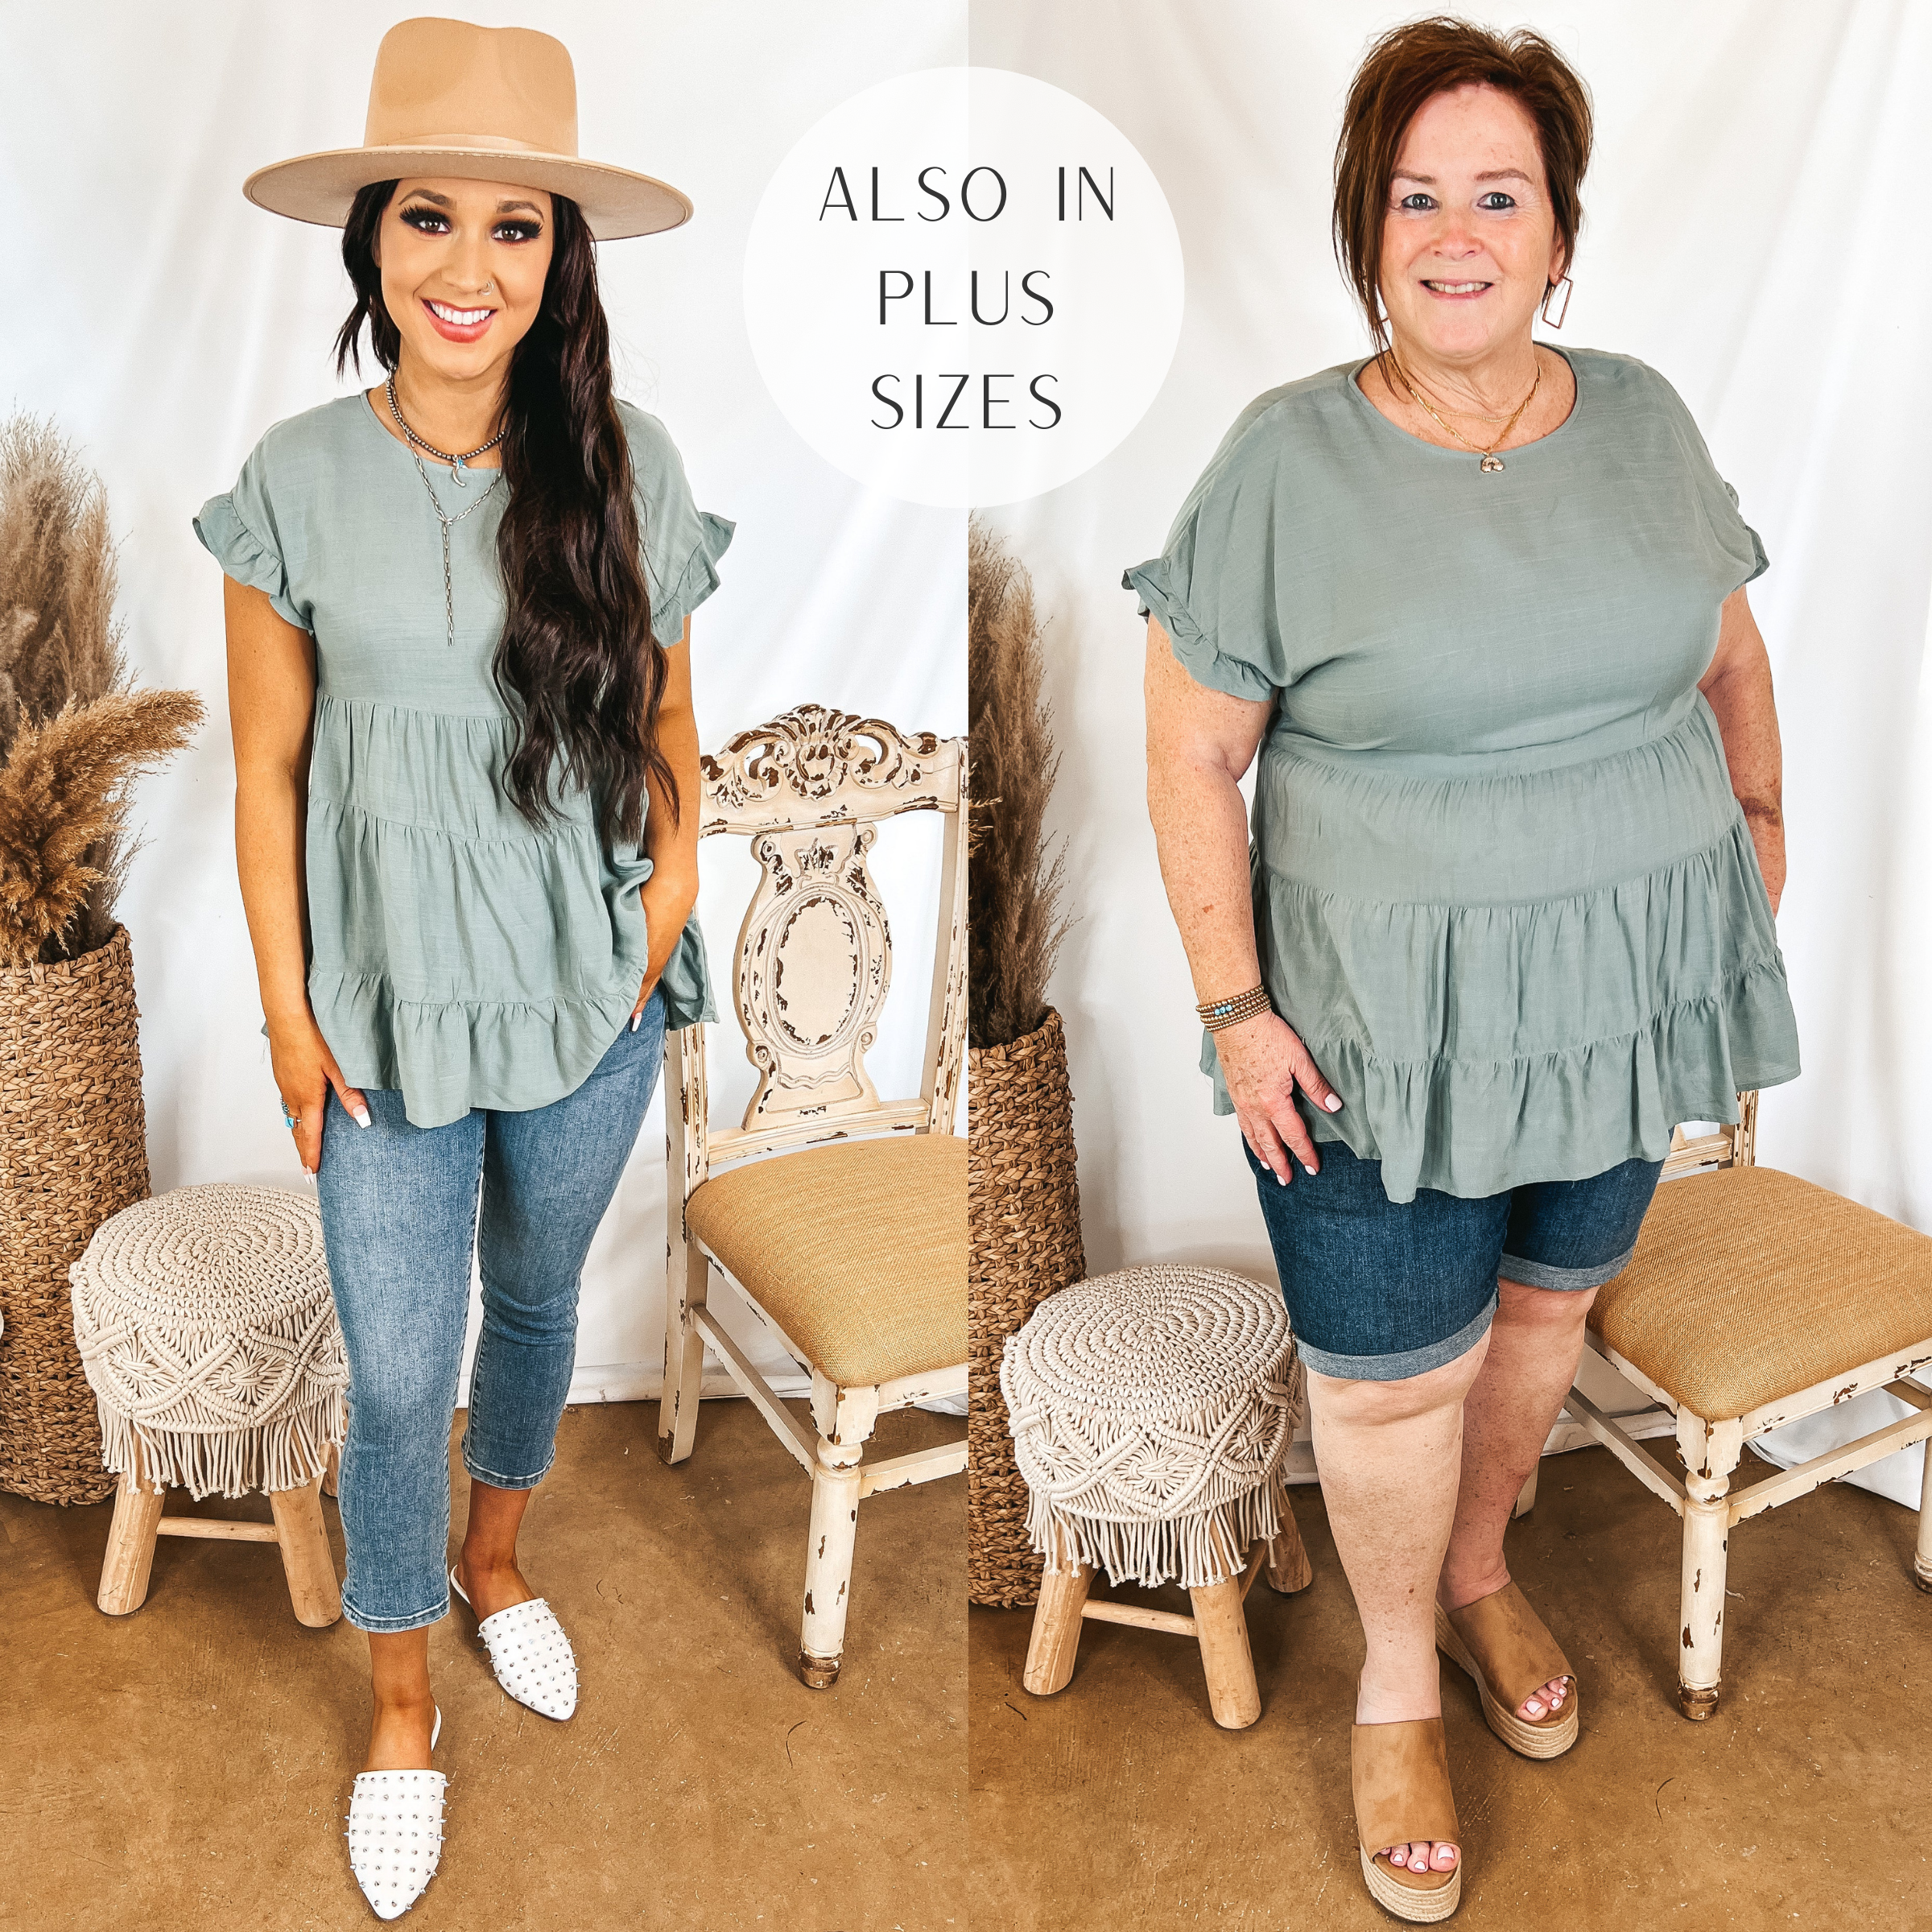 Models are wearing a sage green ruffle top. Size small model has it paired with light wash capri jeans, white mules, and a tan hat. Plus size model has it paired with cuffed bermuda shorts, tan wedges, and gold jewelry.